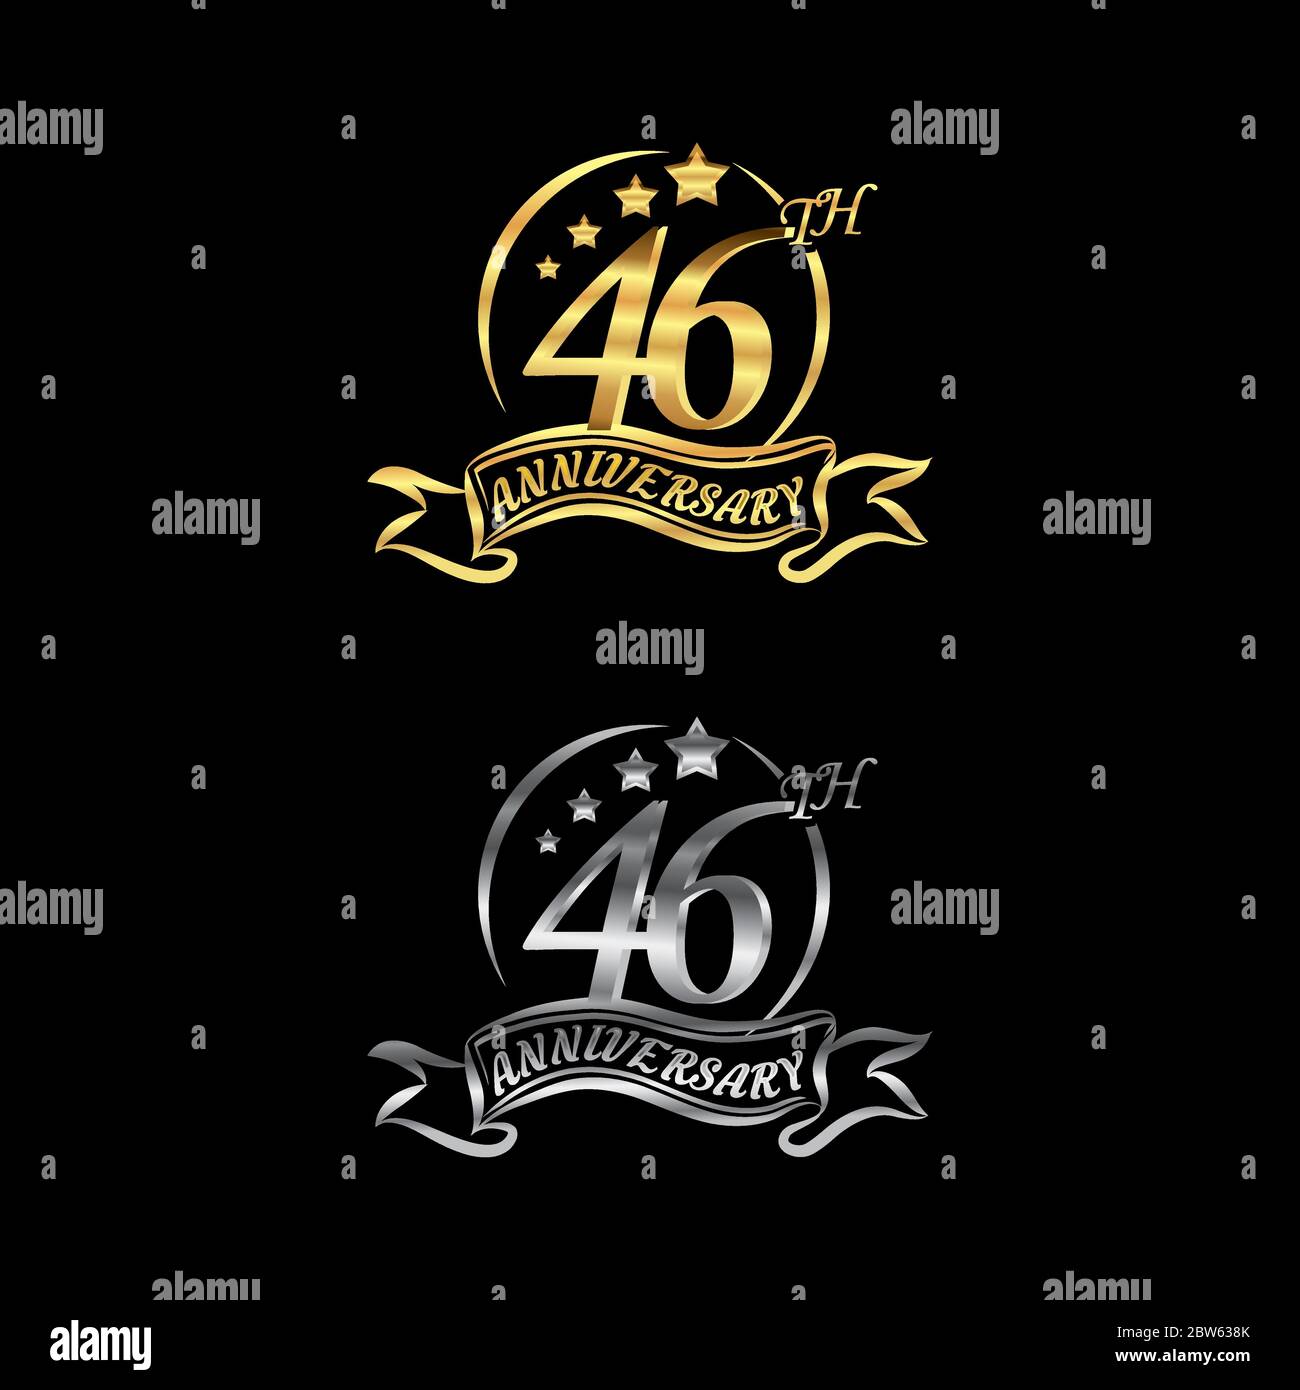 Celebrating the 46th anniversary logo,star shape, with gold and silver rings and gradation ribbons isolated on a black background.EPS 10 Stock Vector